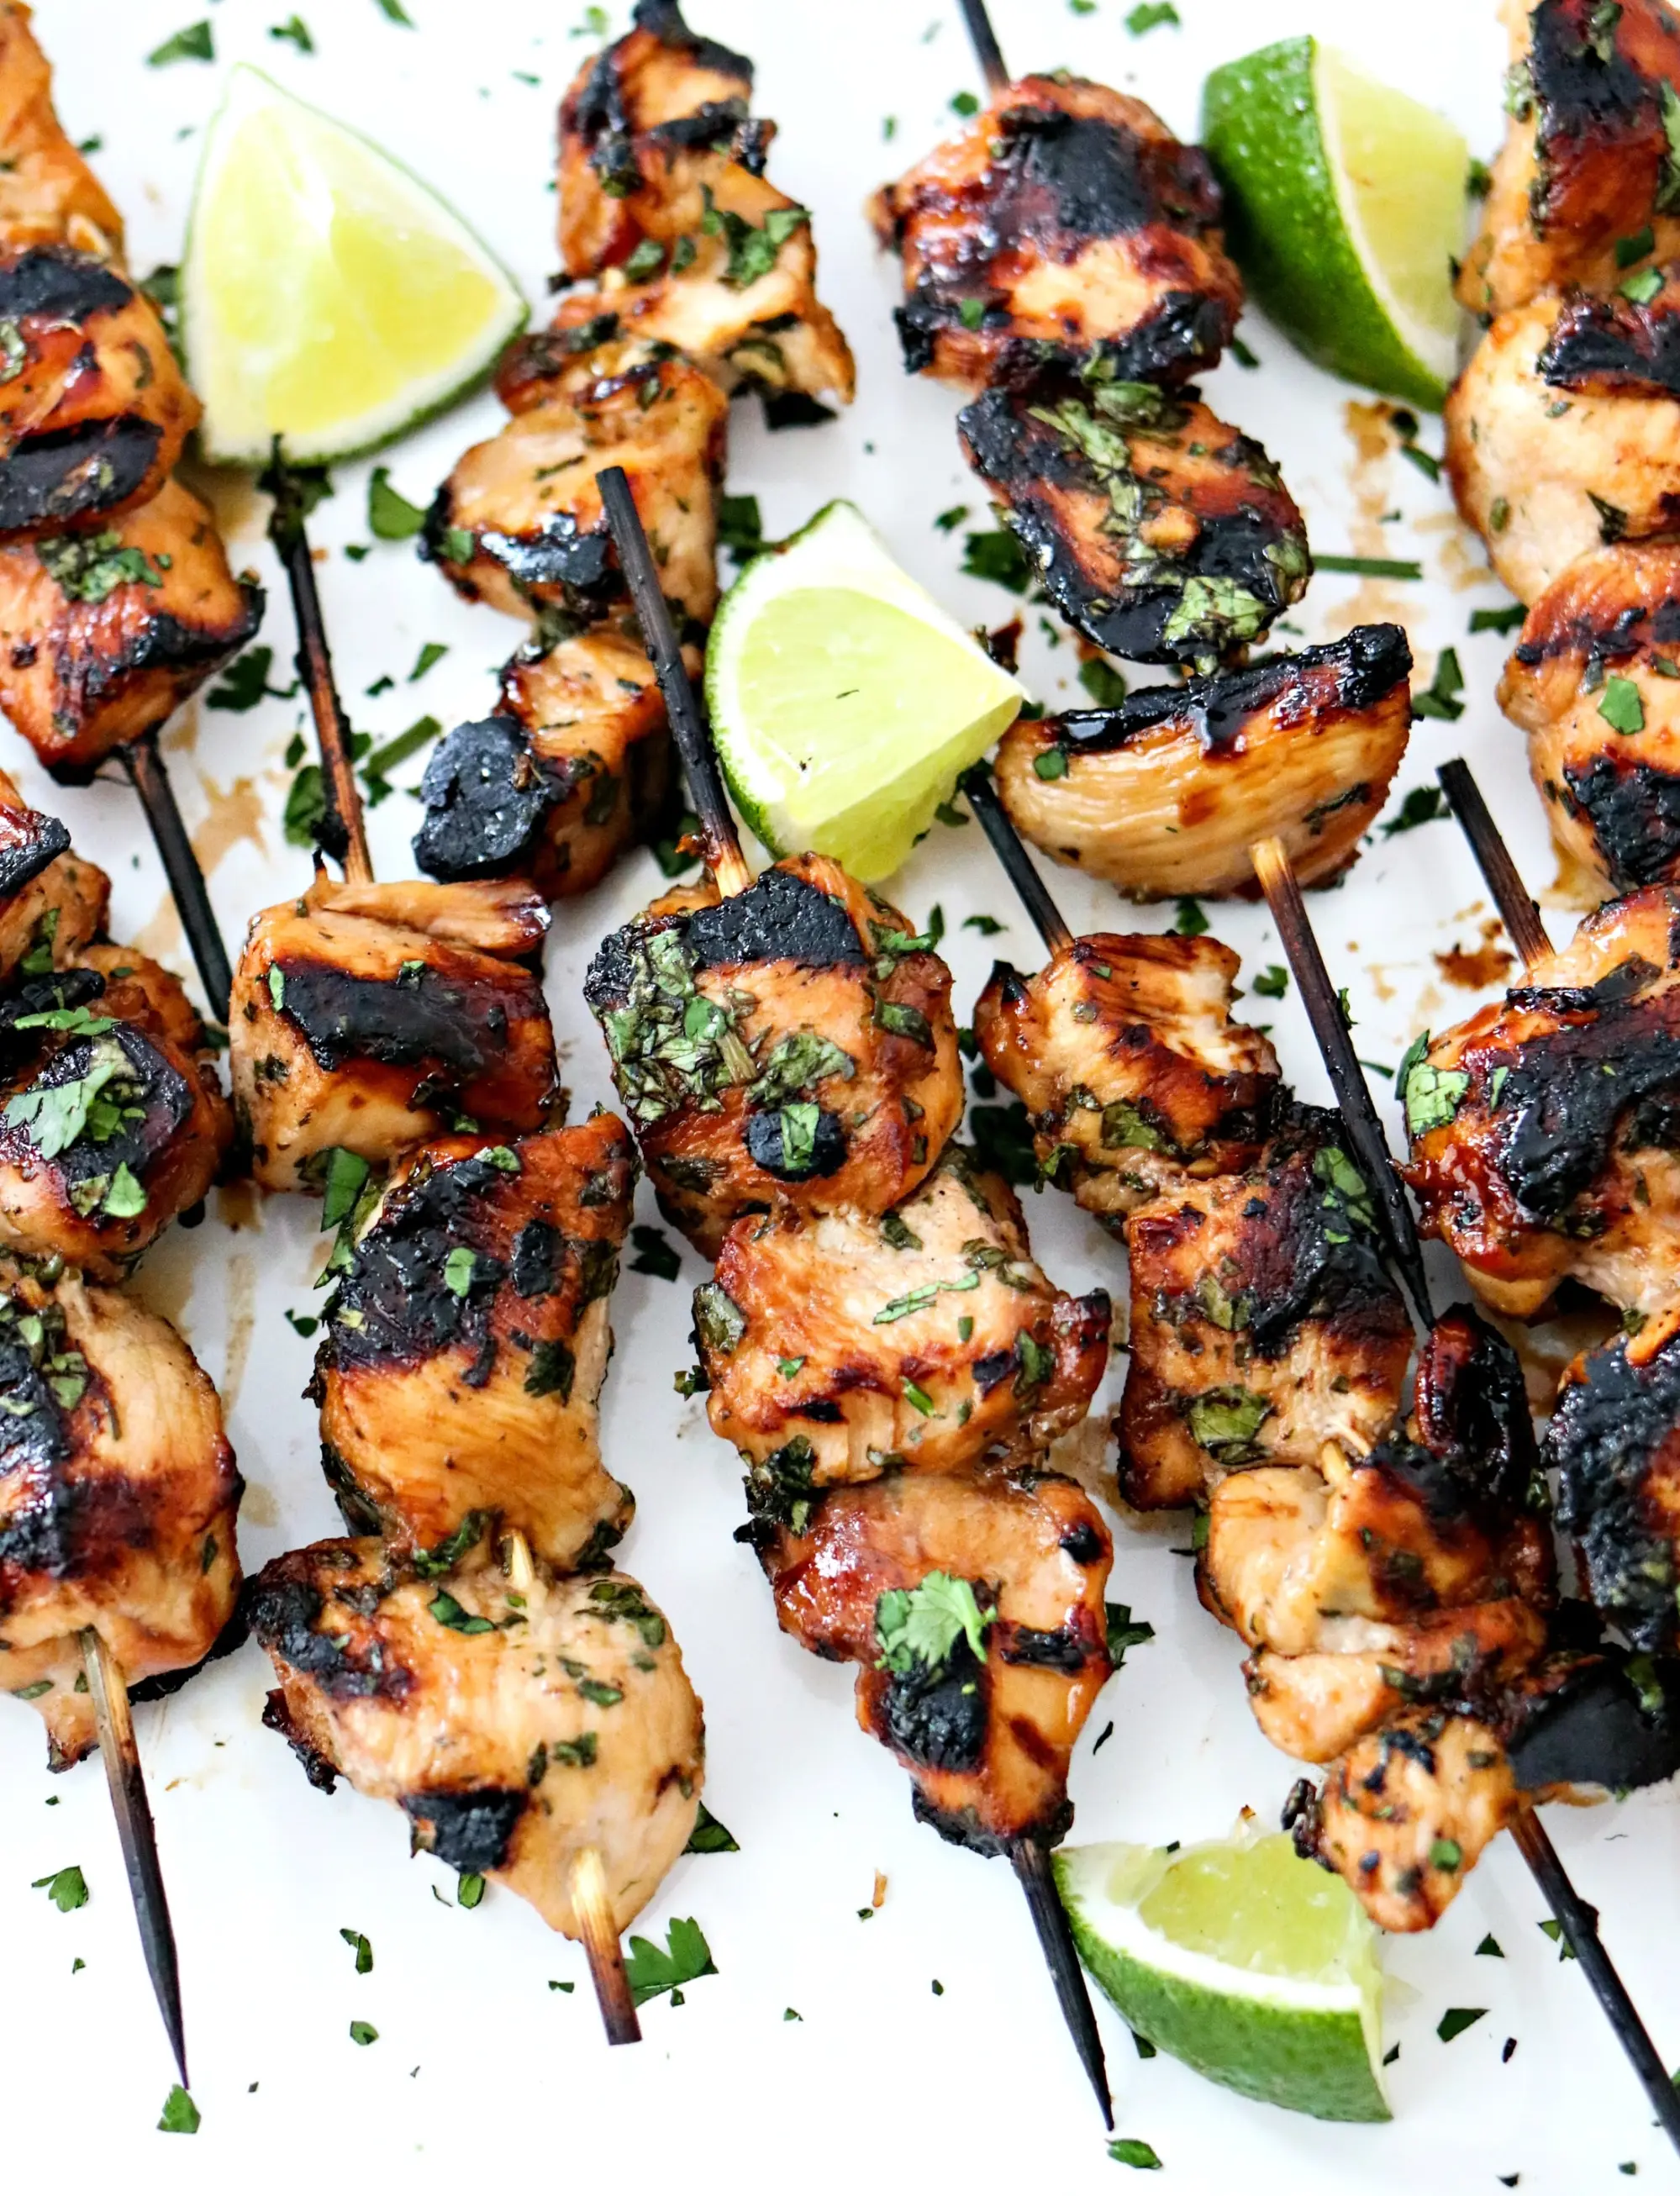 Juicy grilled chicken skewers garnished with fresh herbs and lime wedges on a white plate.